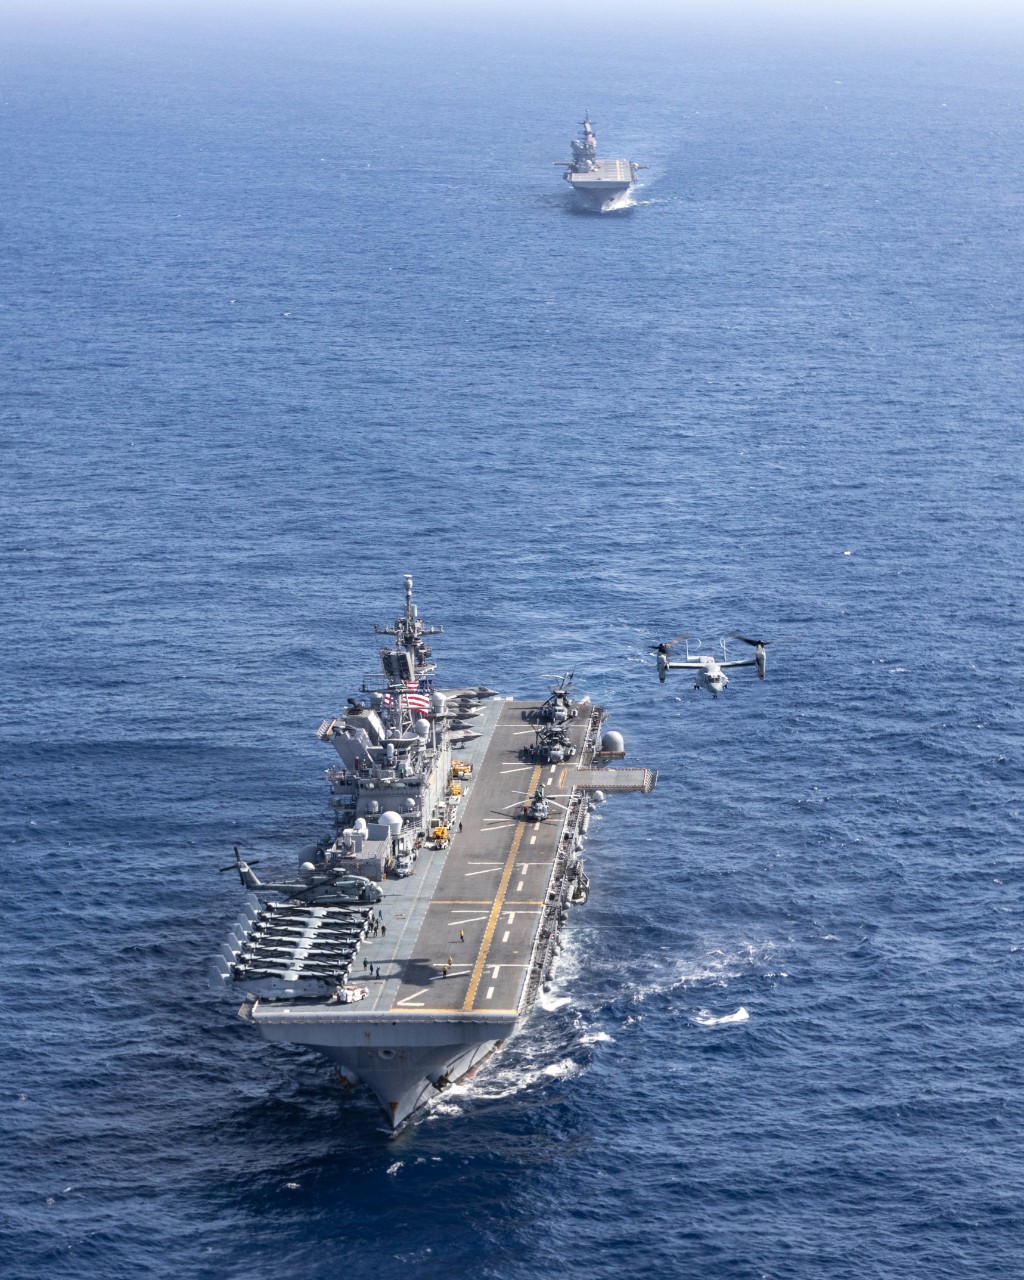 Philippine Sea (Sept. 17, 2022) A U.S. Marine Corps MV-22B Osprey helicopter takes off from the amphibious assault ship USS Tripoli (LHA 7) as it sails in front of USS America (LHA 6) during a photo exercise in the Philippine Sea, Sept. 17, 2022....